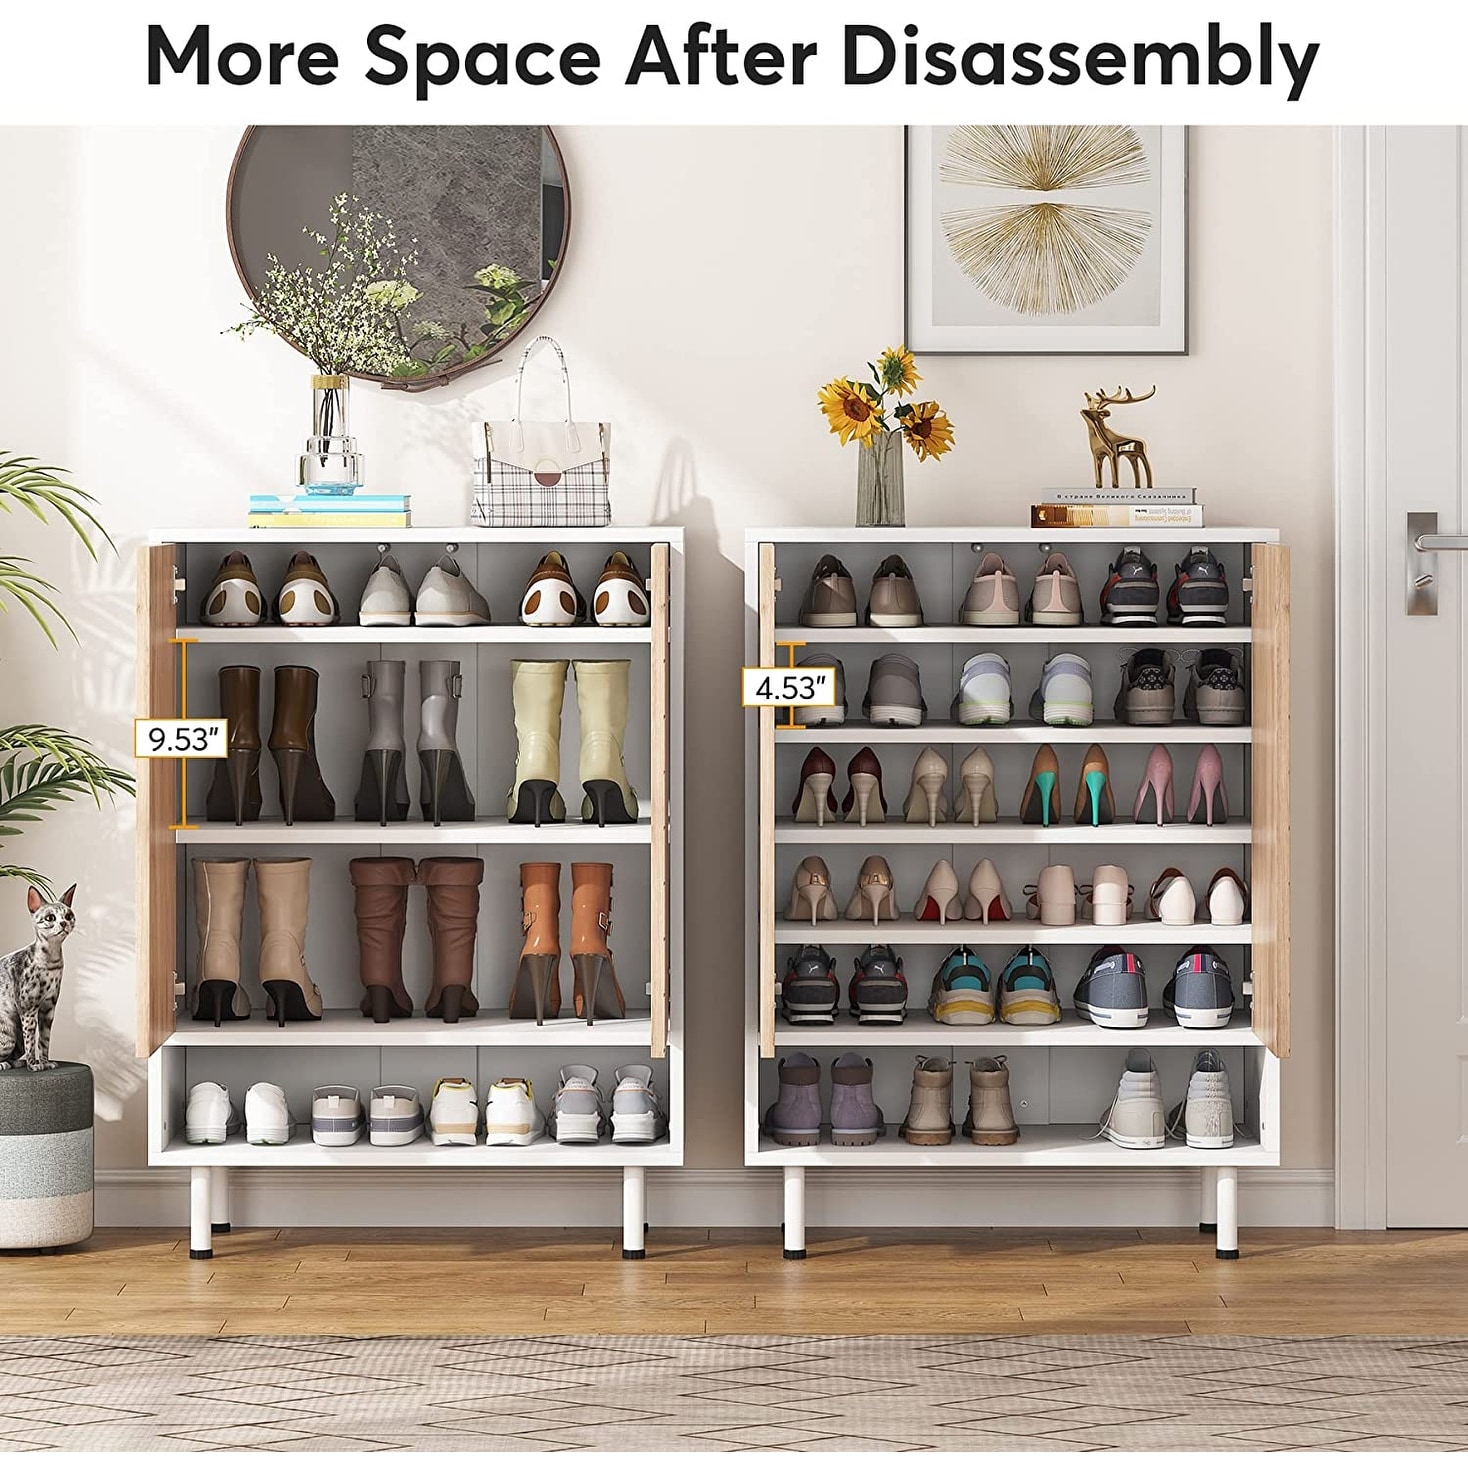 https://ak1.ostkcdn.com/images/products/is/images/direct/48e3575796323349332aff26d592e95a7ae430be/Entryway-Shoe-Storage-Cabinet-Shoe-Rack-Organizer-Cabinet-with-Door.jpg